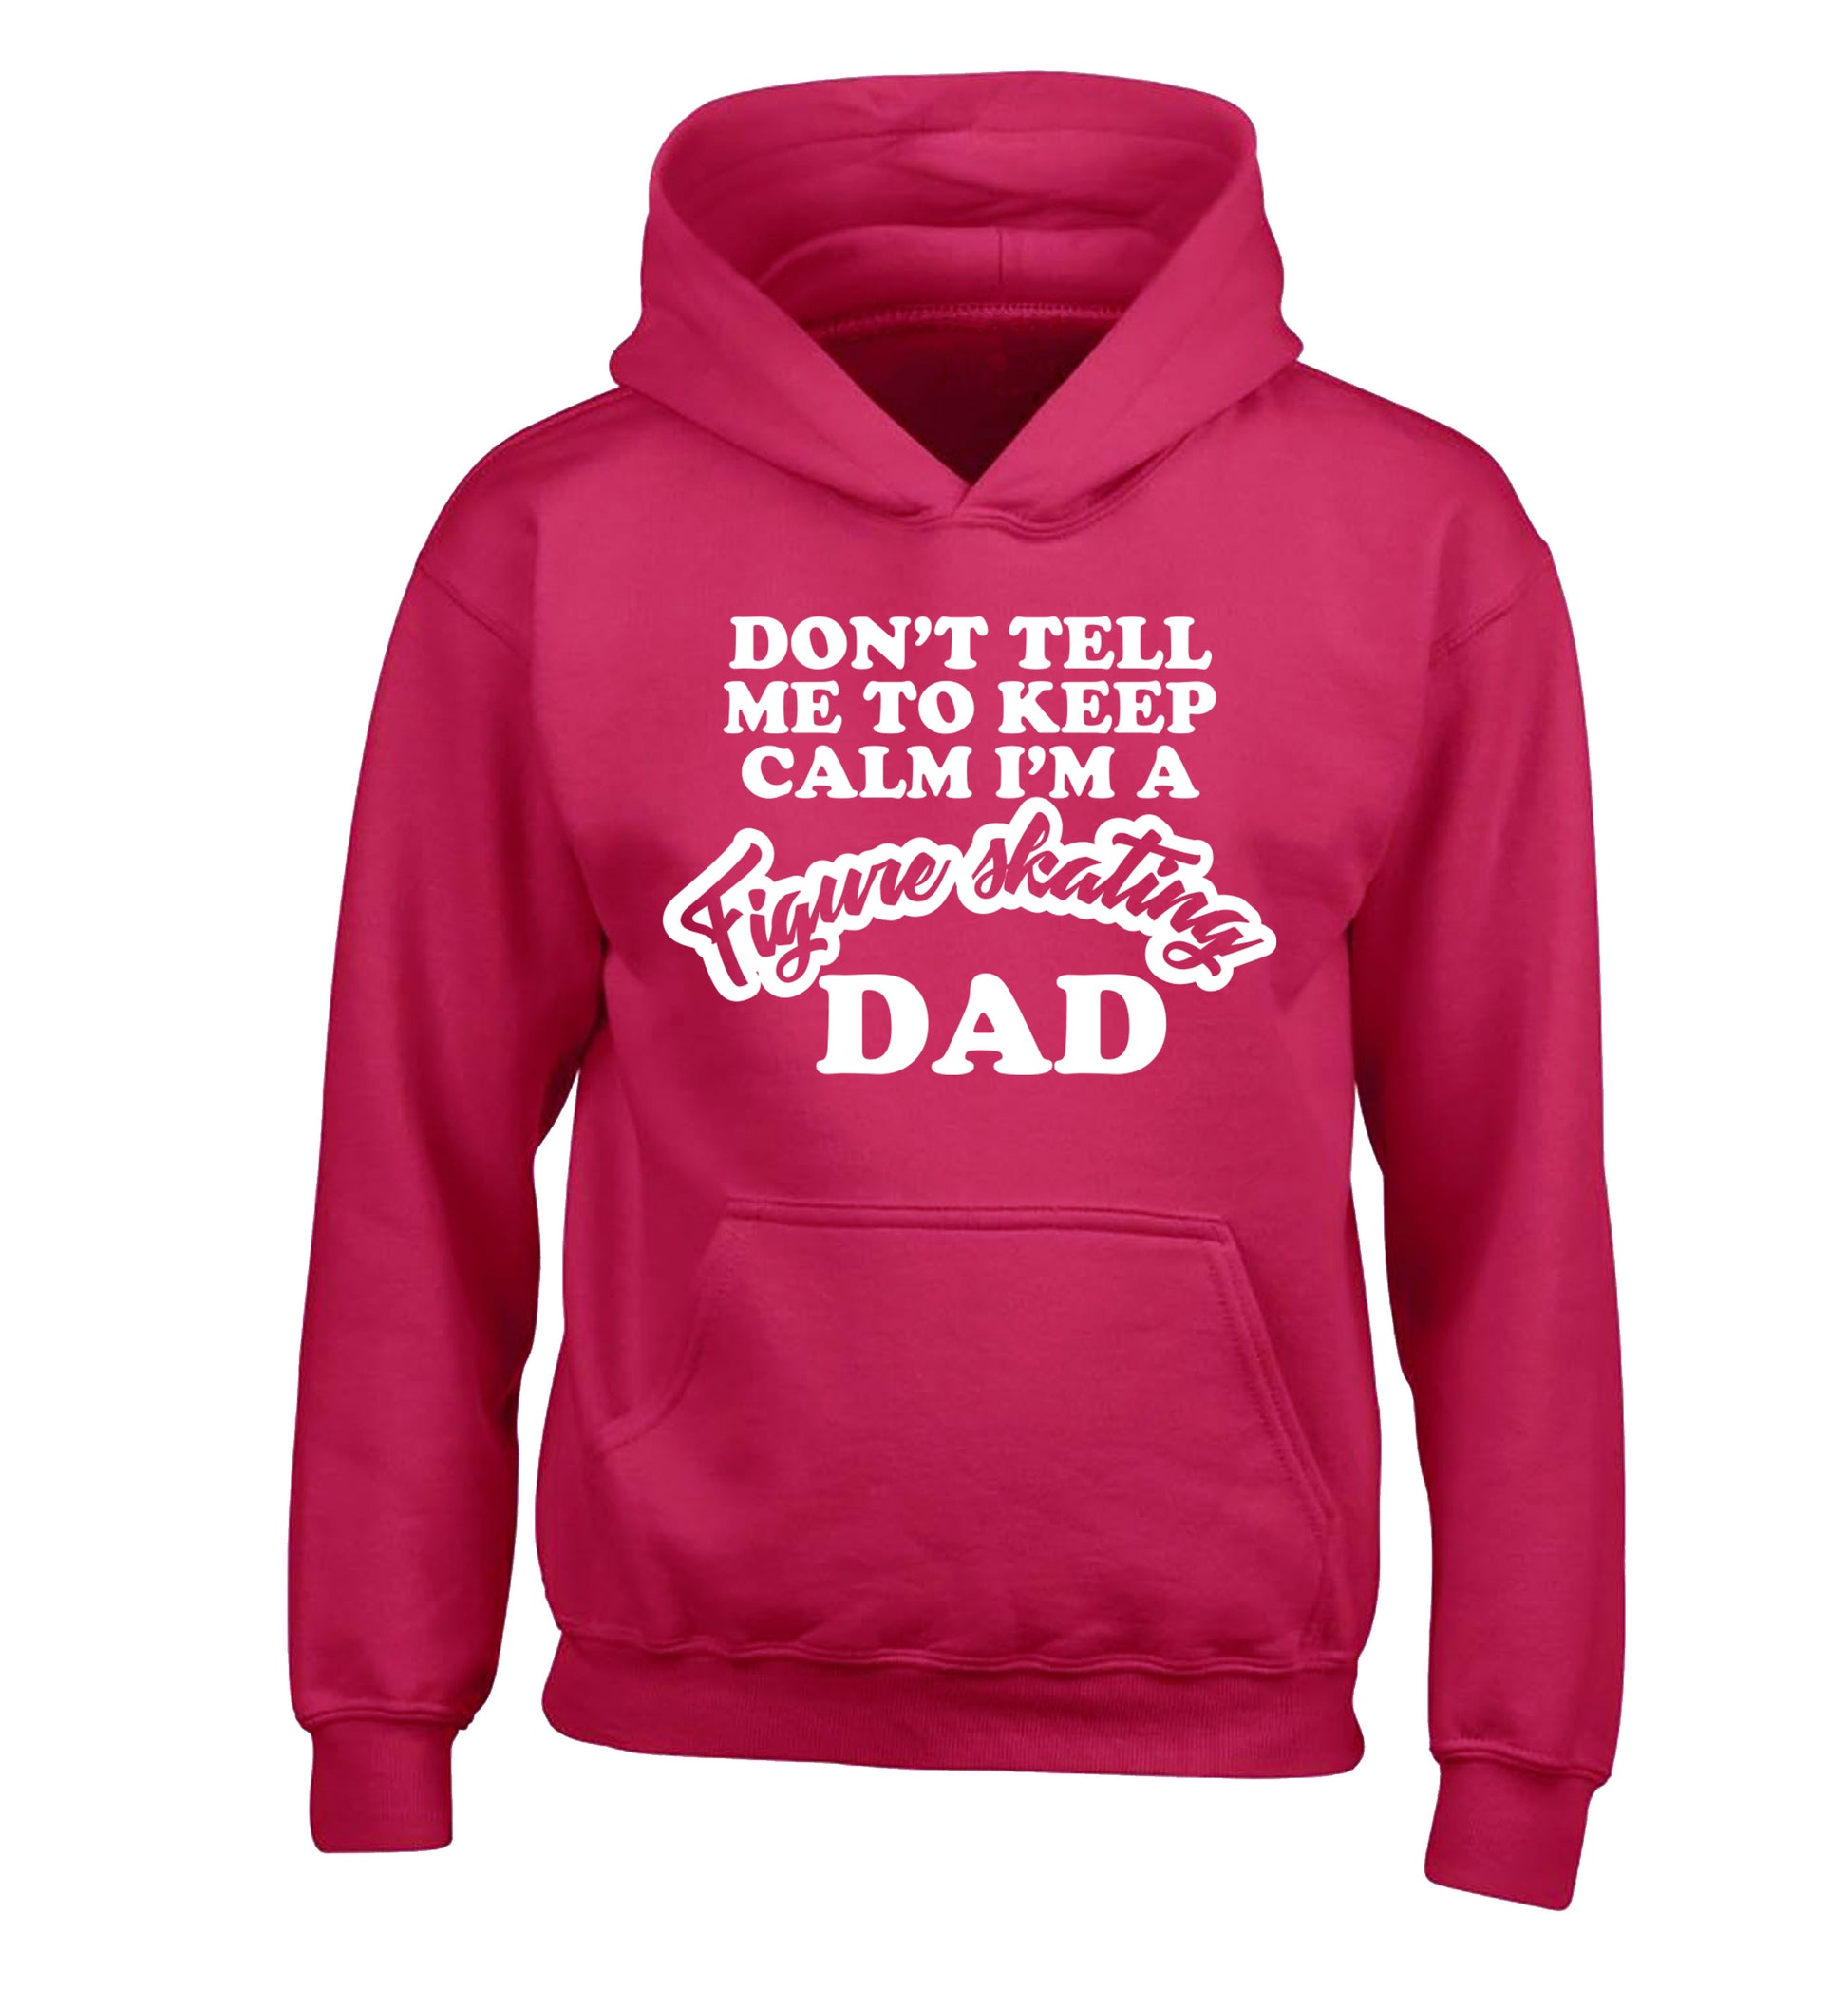 Don't tell me to keep calm I'm a figure skating dad children's pink hoodie 12-14 Years